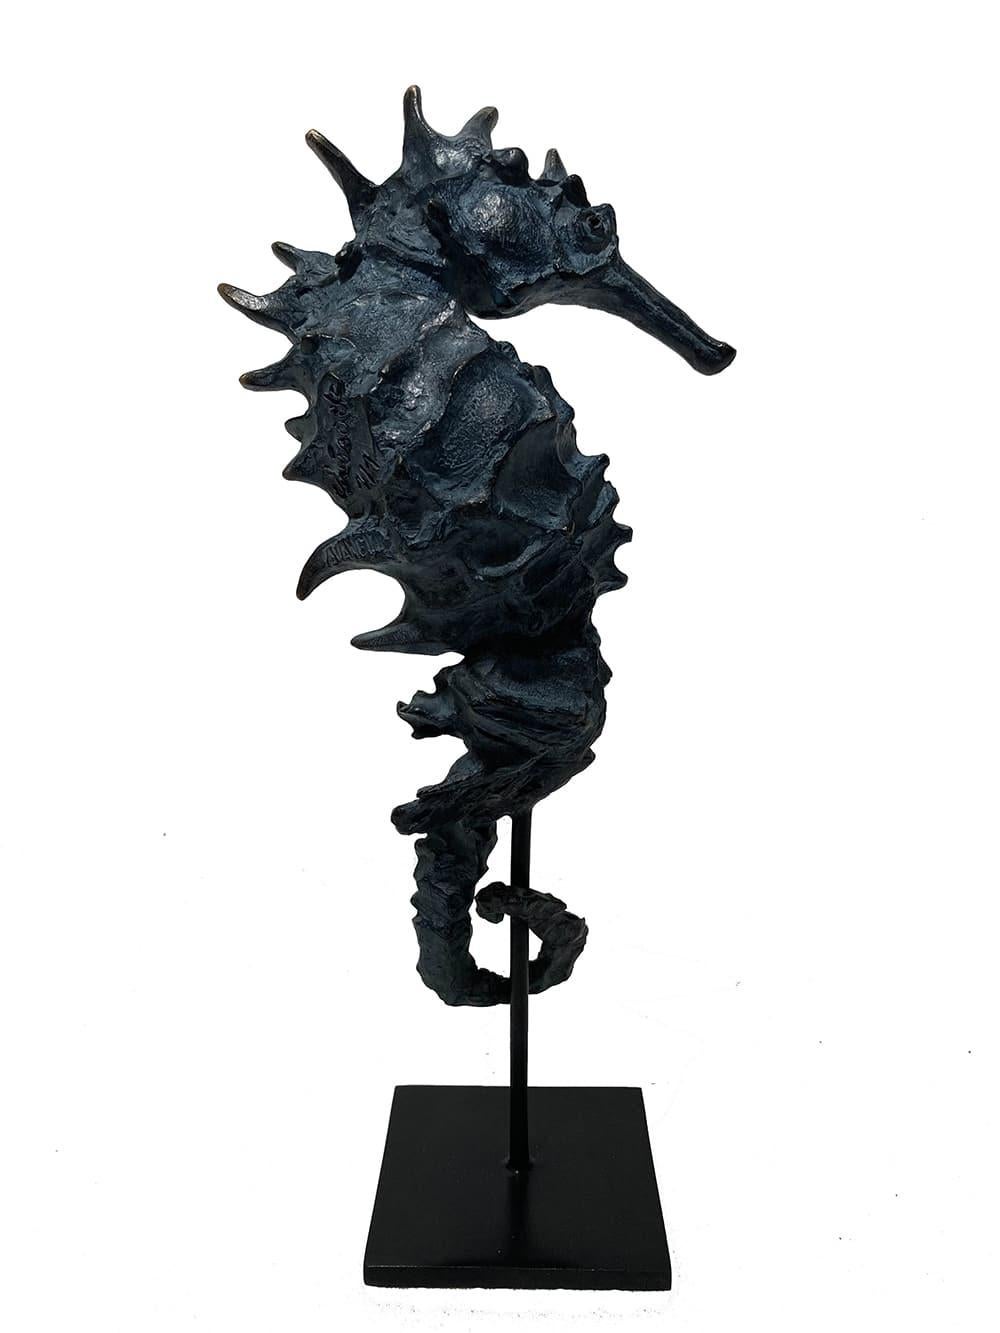 Ultramarine seahorse II is a unique bronze sculpture by contemporary artist Chésade, dimensions are 25 × 10.5 × 6 cm (9.8 × 4.1 × 2.4 in). The specified dimensions include the stand and the shaft. Height of the bronze sculpture : 20 cm
The sculpture